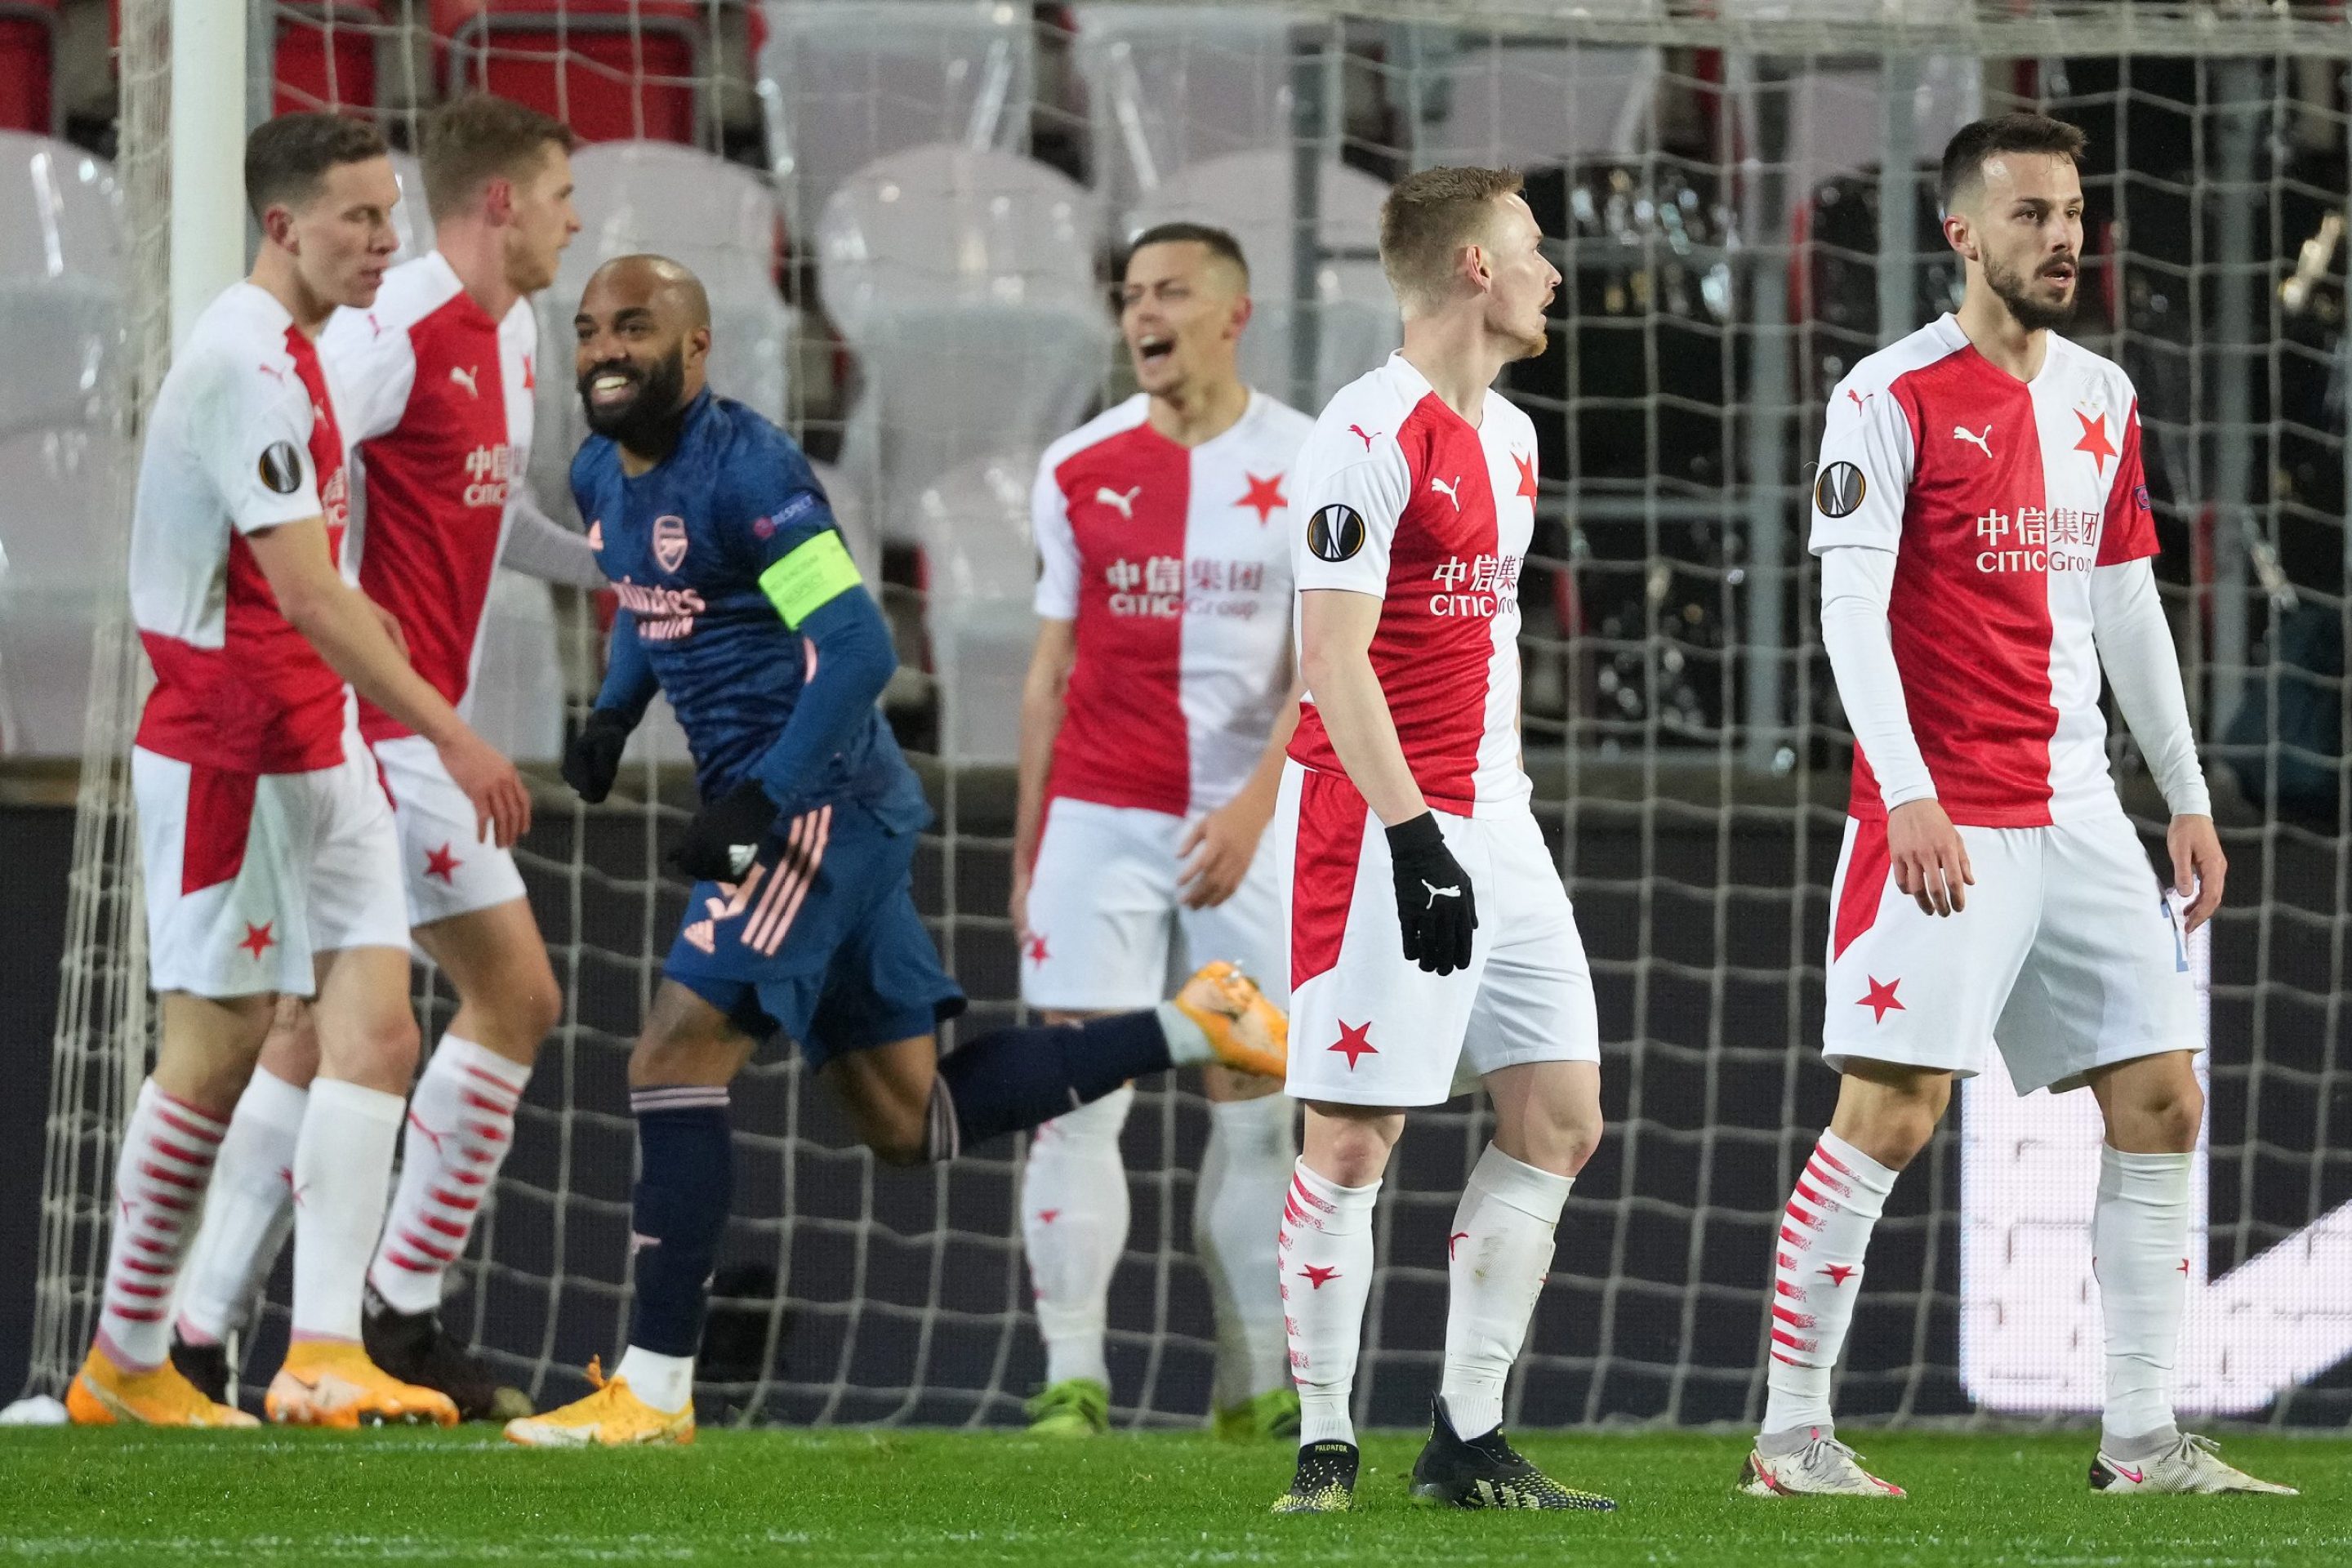 Players of Slavia Praha look dejected after Alexandre Lacazette of Arsenal scored his team's second goal from the penalty spot during the UEFA Europa League Quarter Final Second Leg match between Slavia Praha and Arsenal FC at Sinobo Stadium on April 15, 2021 in Prague, Czech Republic